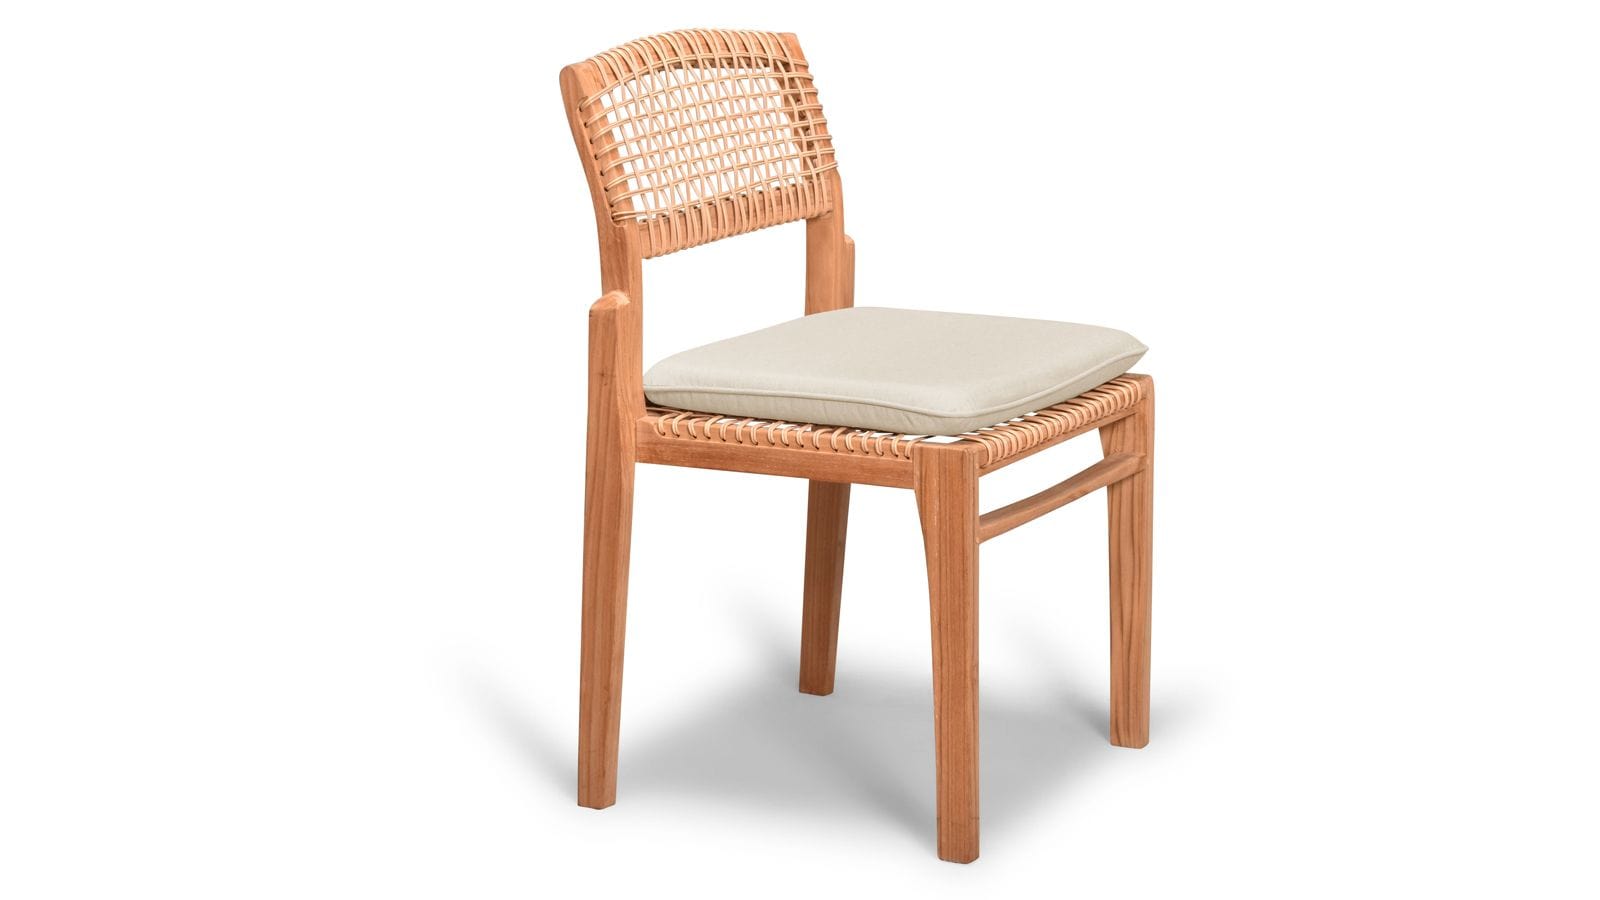 Harmonia Living Outdoor Furniture Canvas flax Harmonia Living - Sands Dining Side Chair | HL-SNDS-SD-DSC